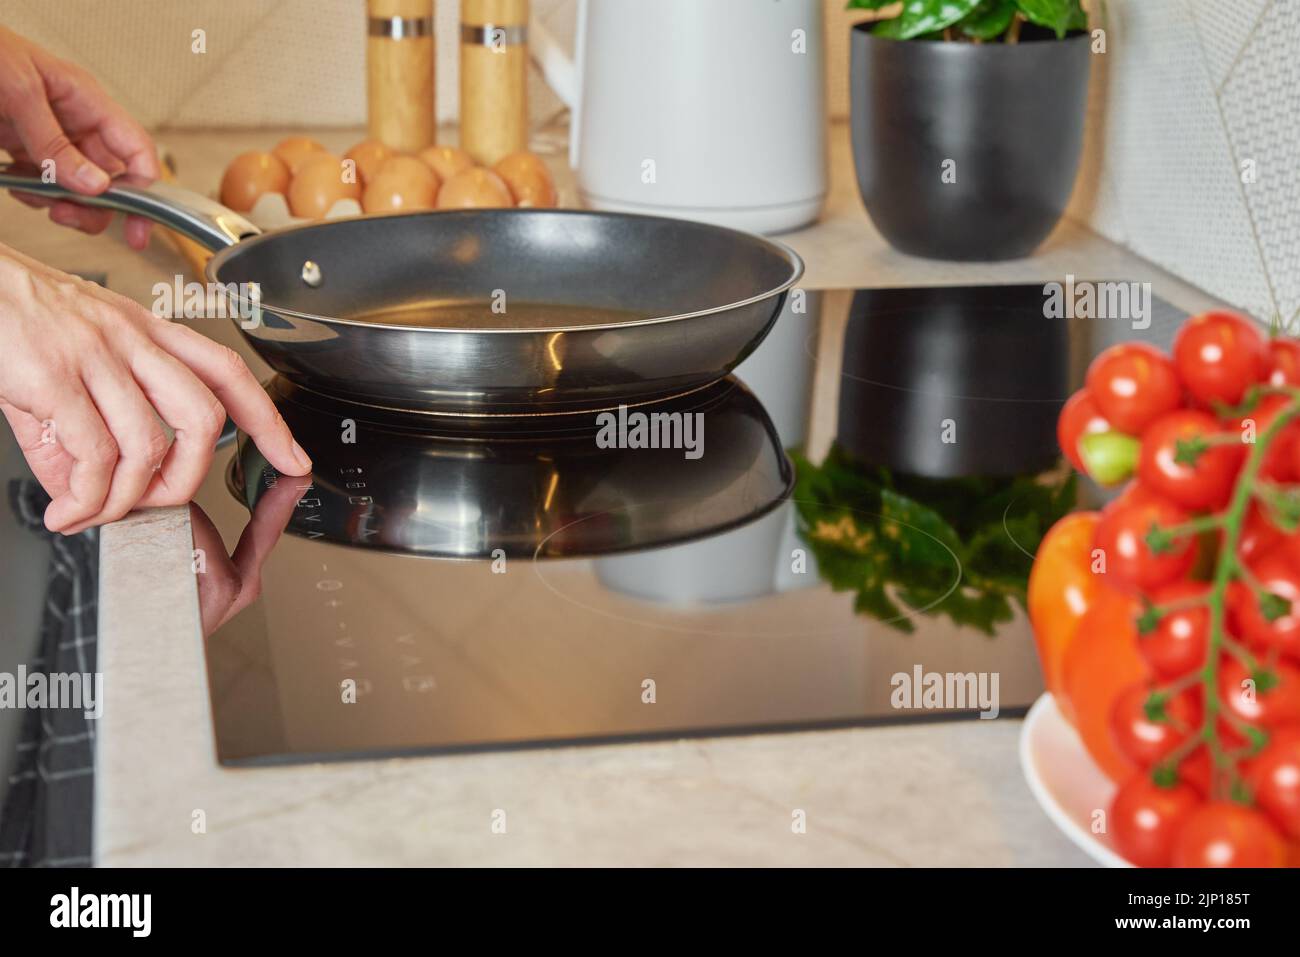 https://c8.alamy.com/comp/2JP185T/modern-kitchen-appliance-woman-hand-turn-on-induction-stove-with-steel-frying-pan-finger-touching-sensor-button-on-induction-or-electrical-hob-2JP185T.jpg